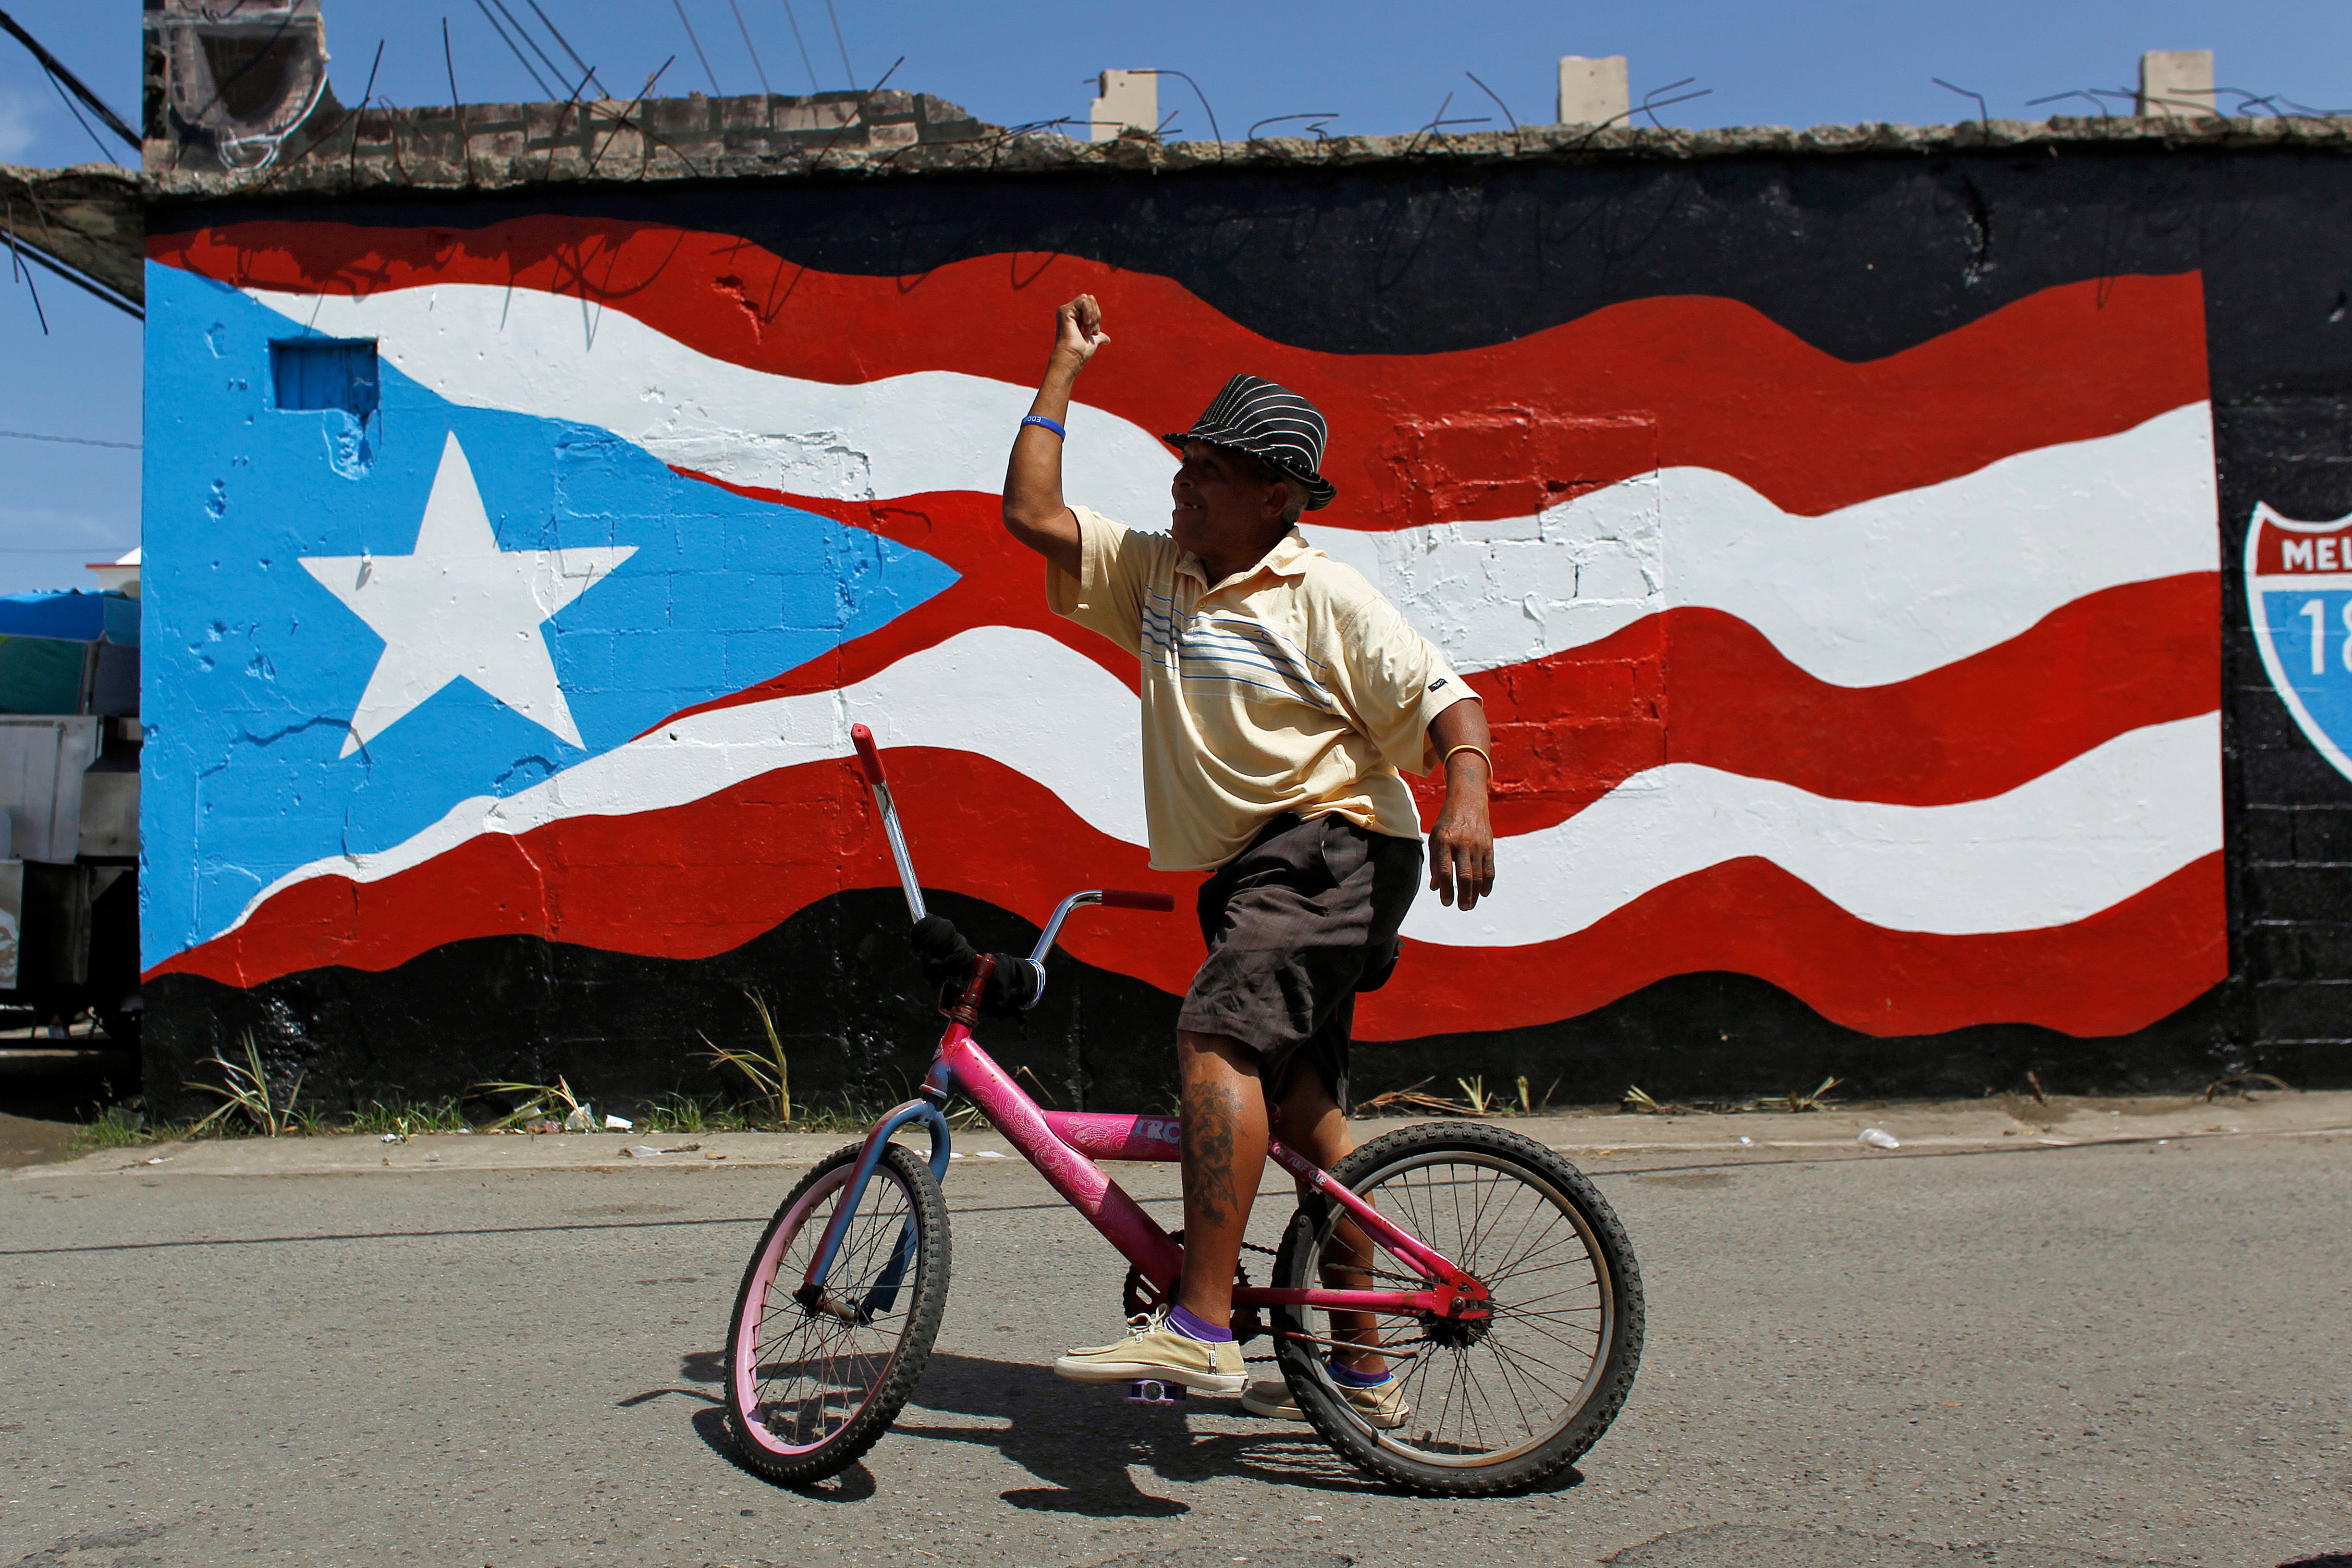 A man gestures on a bike in Puerto Rico.